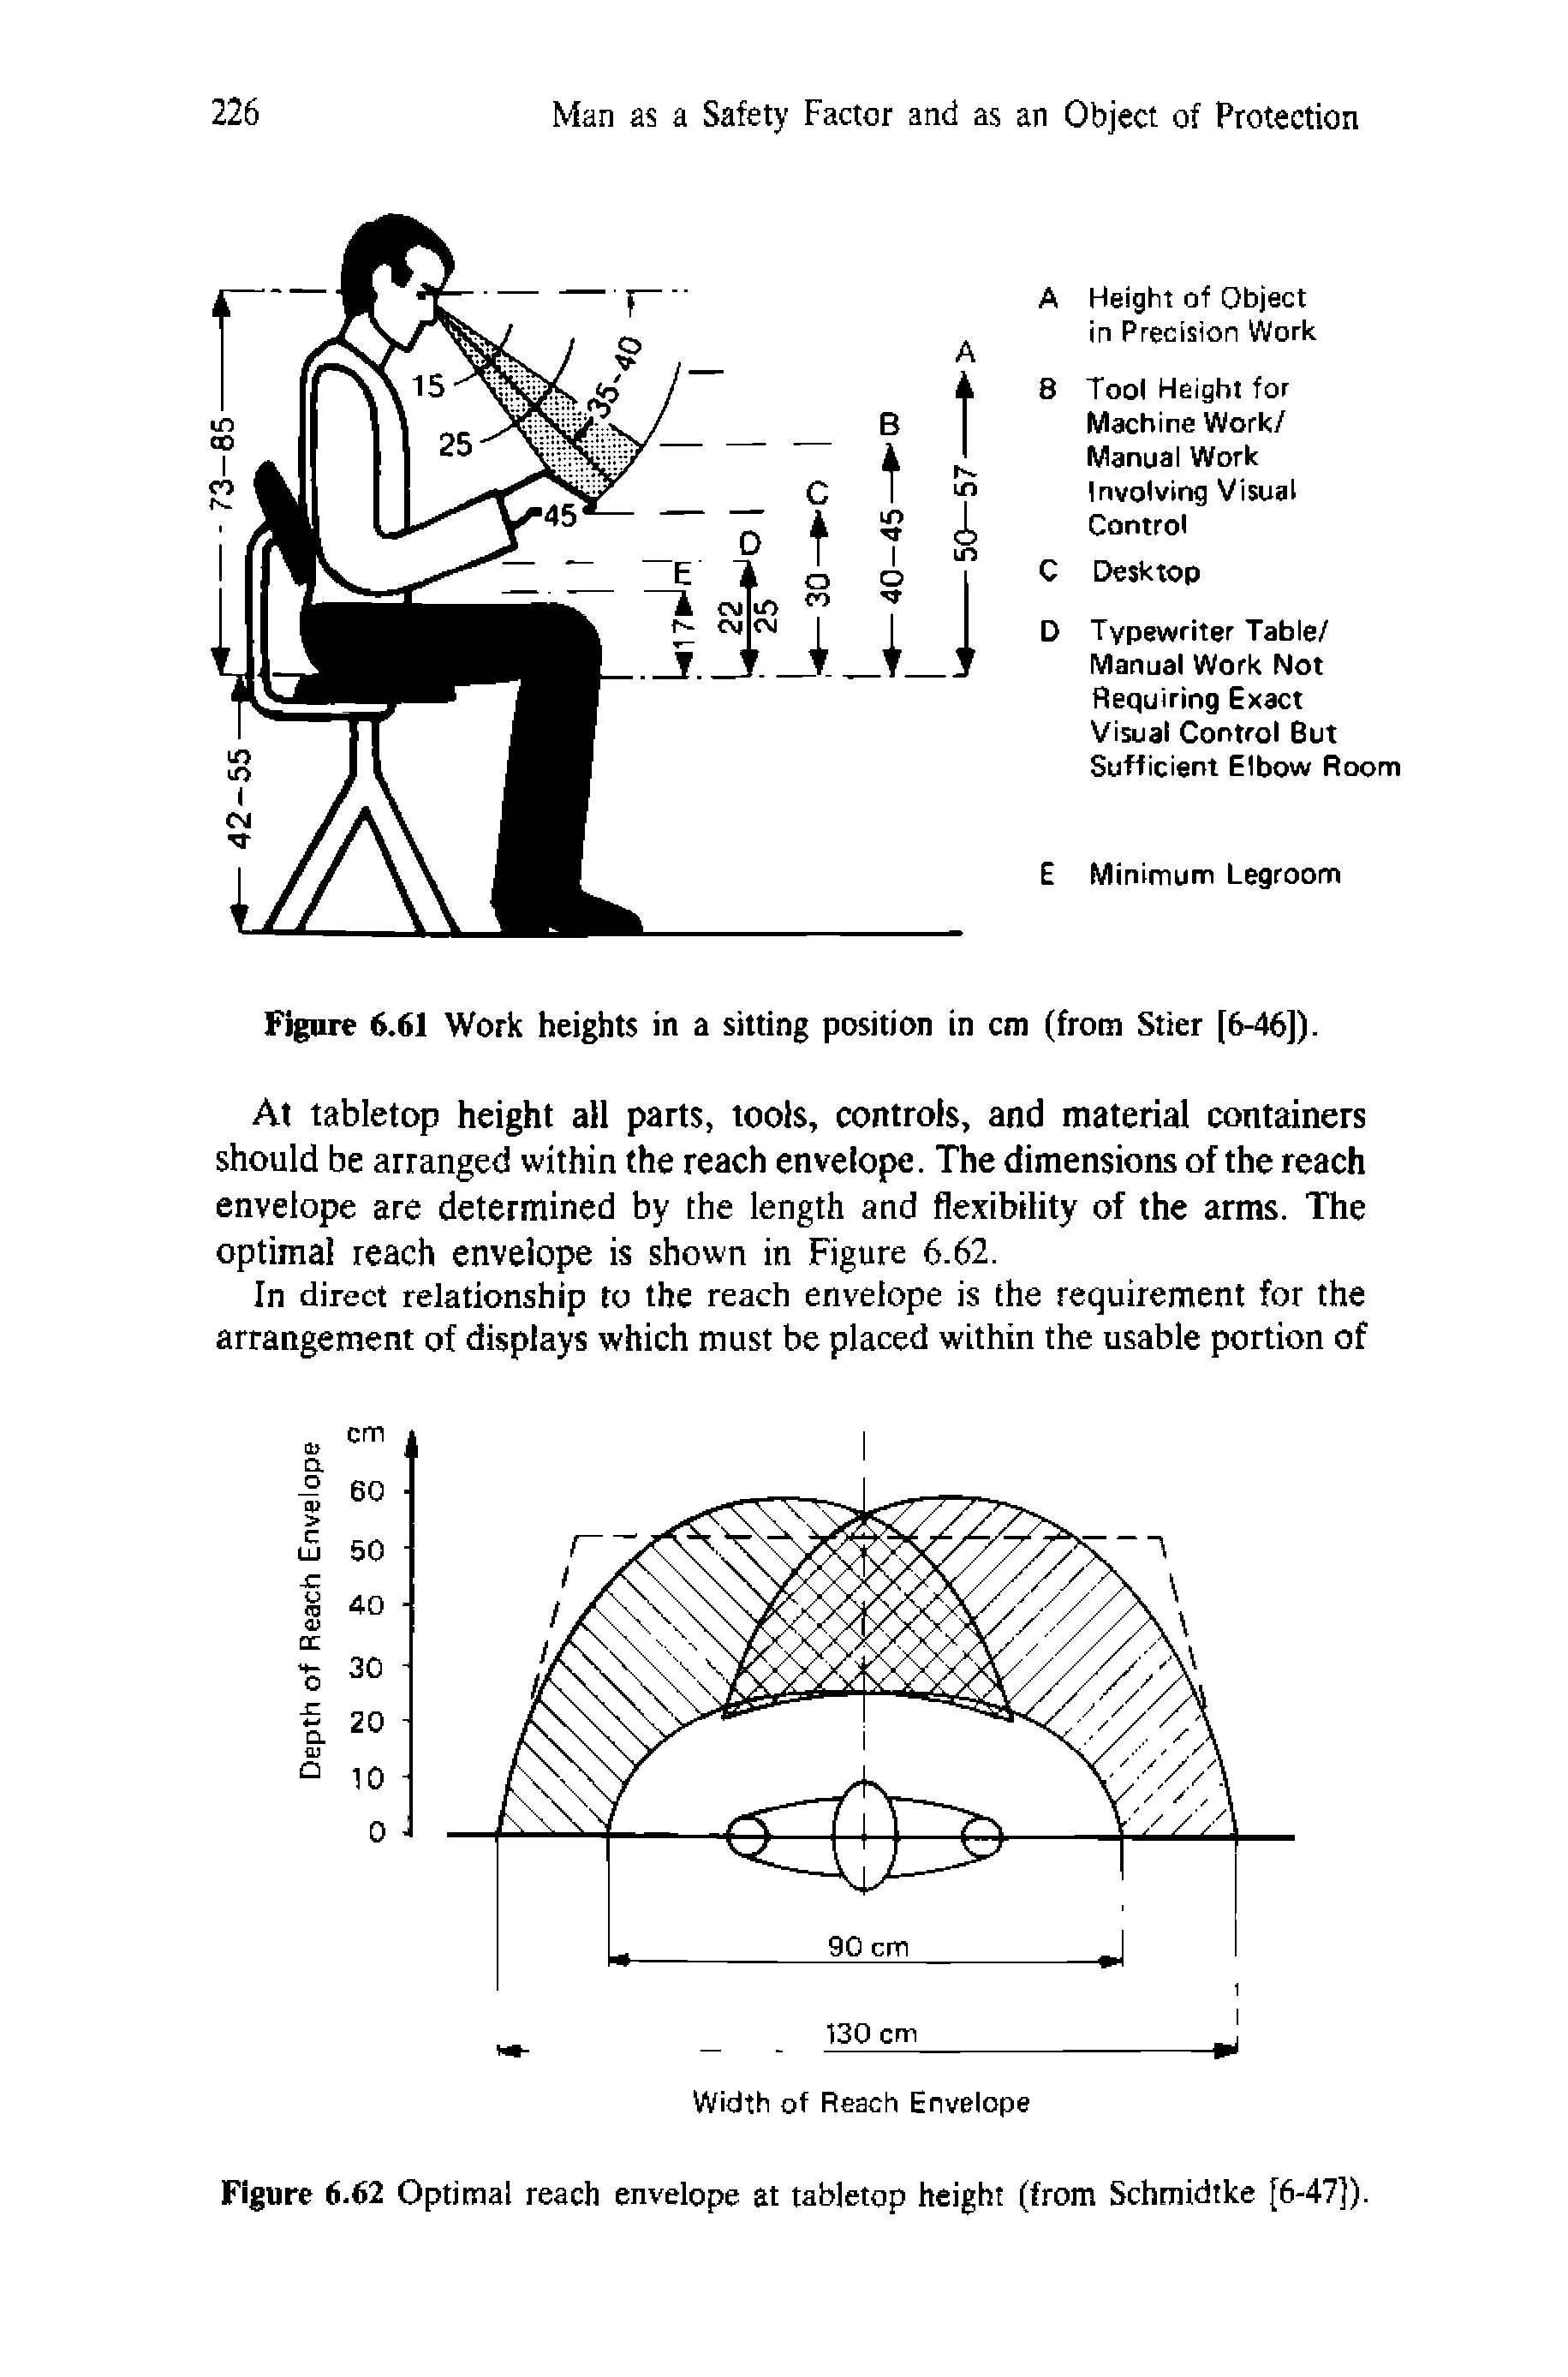 Figure 6.61 Work heights in a sitting position in cm (from Stier [6-46]).